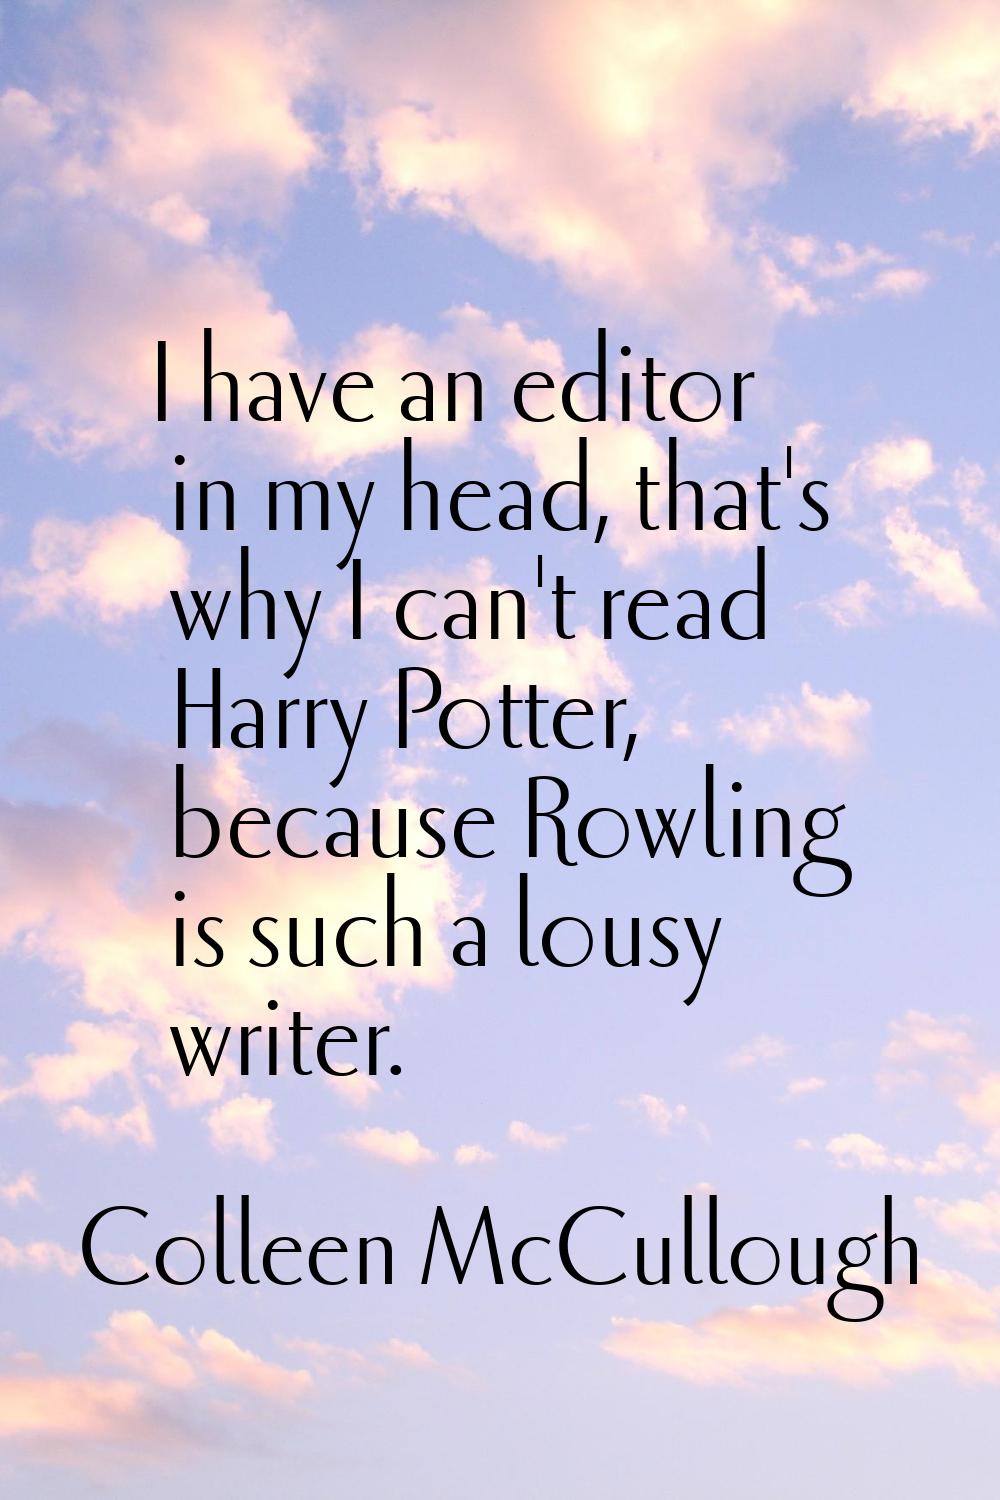 I have an editor in my head, that's why I can't read Harry Potter, because Rowling is such a lousy 